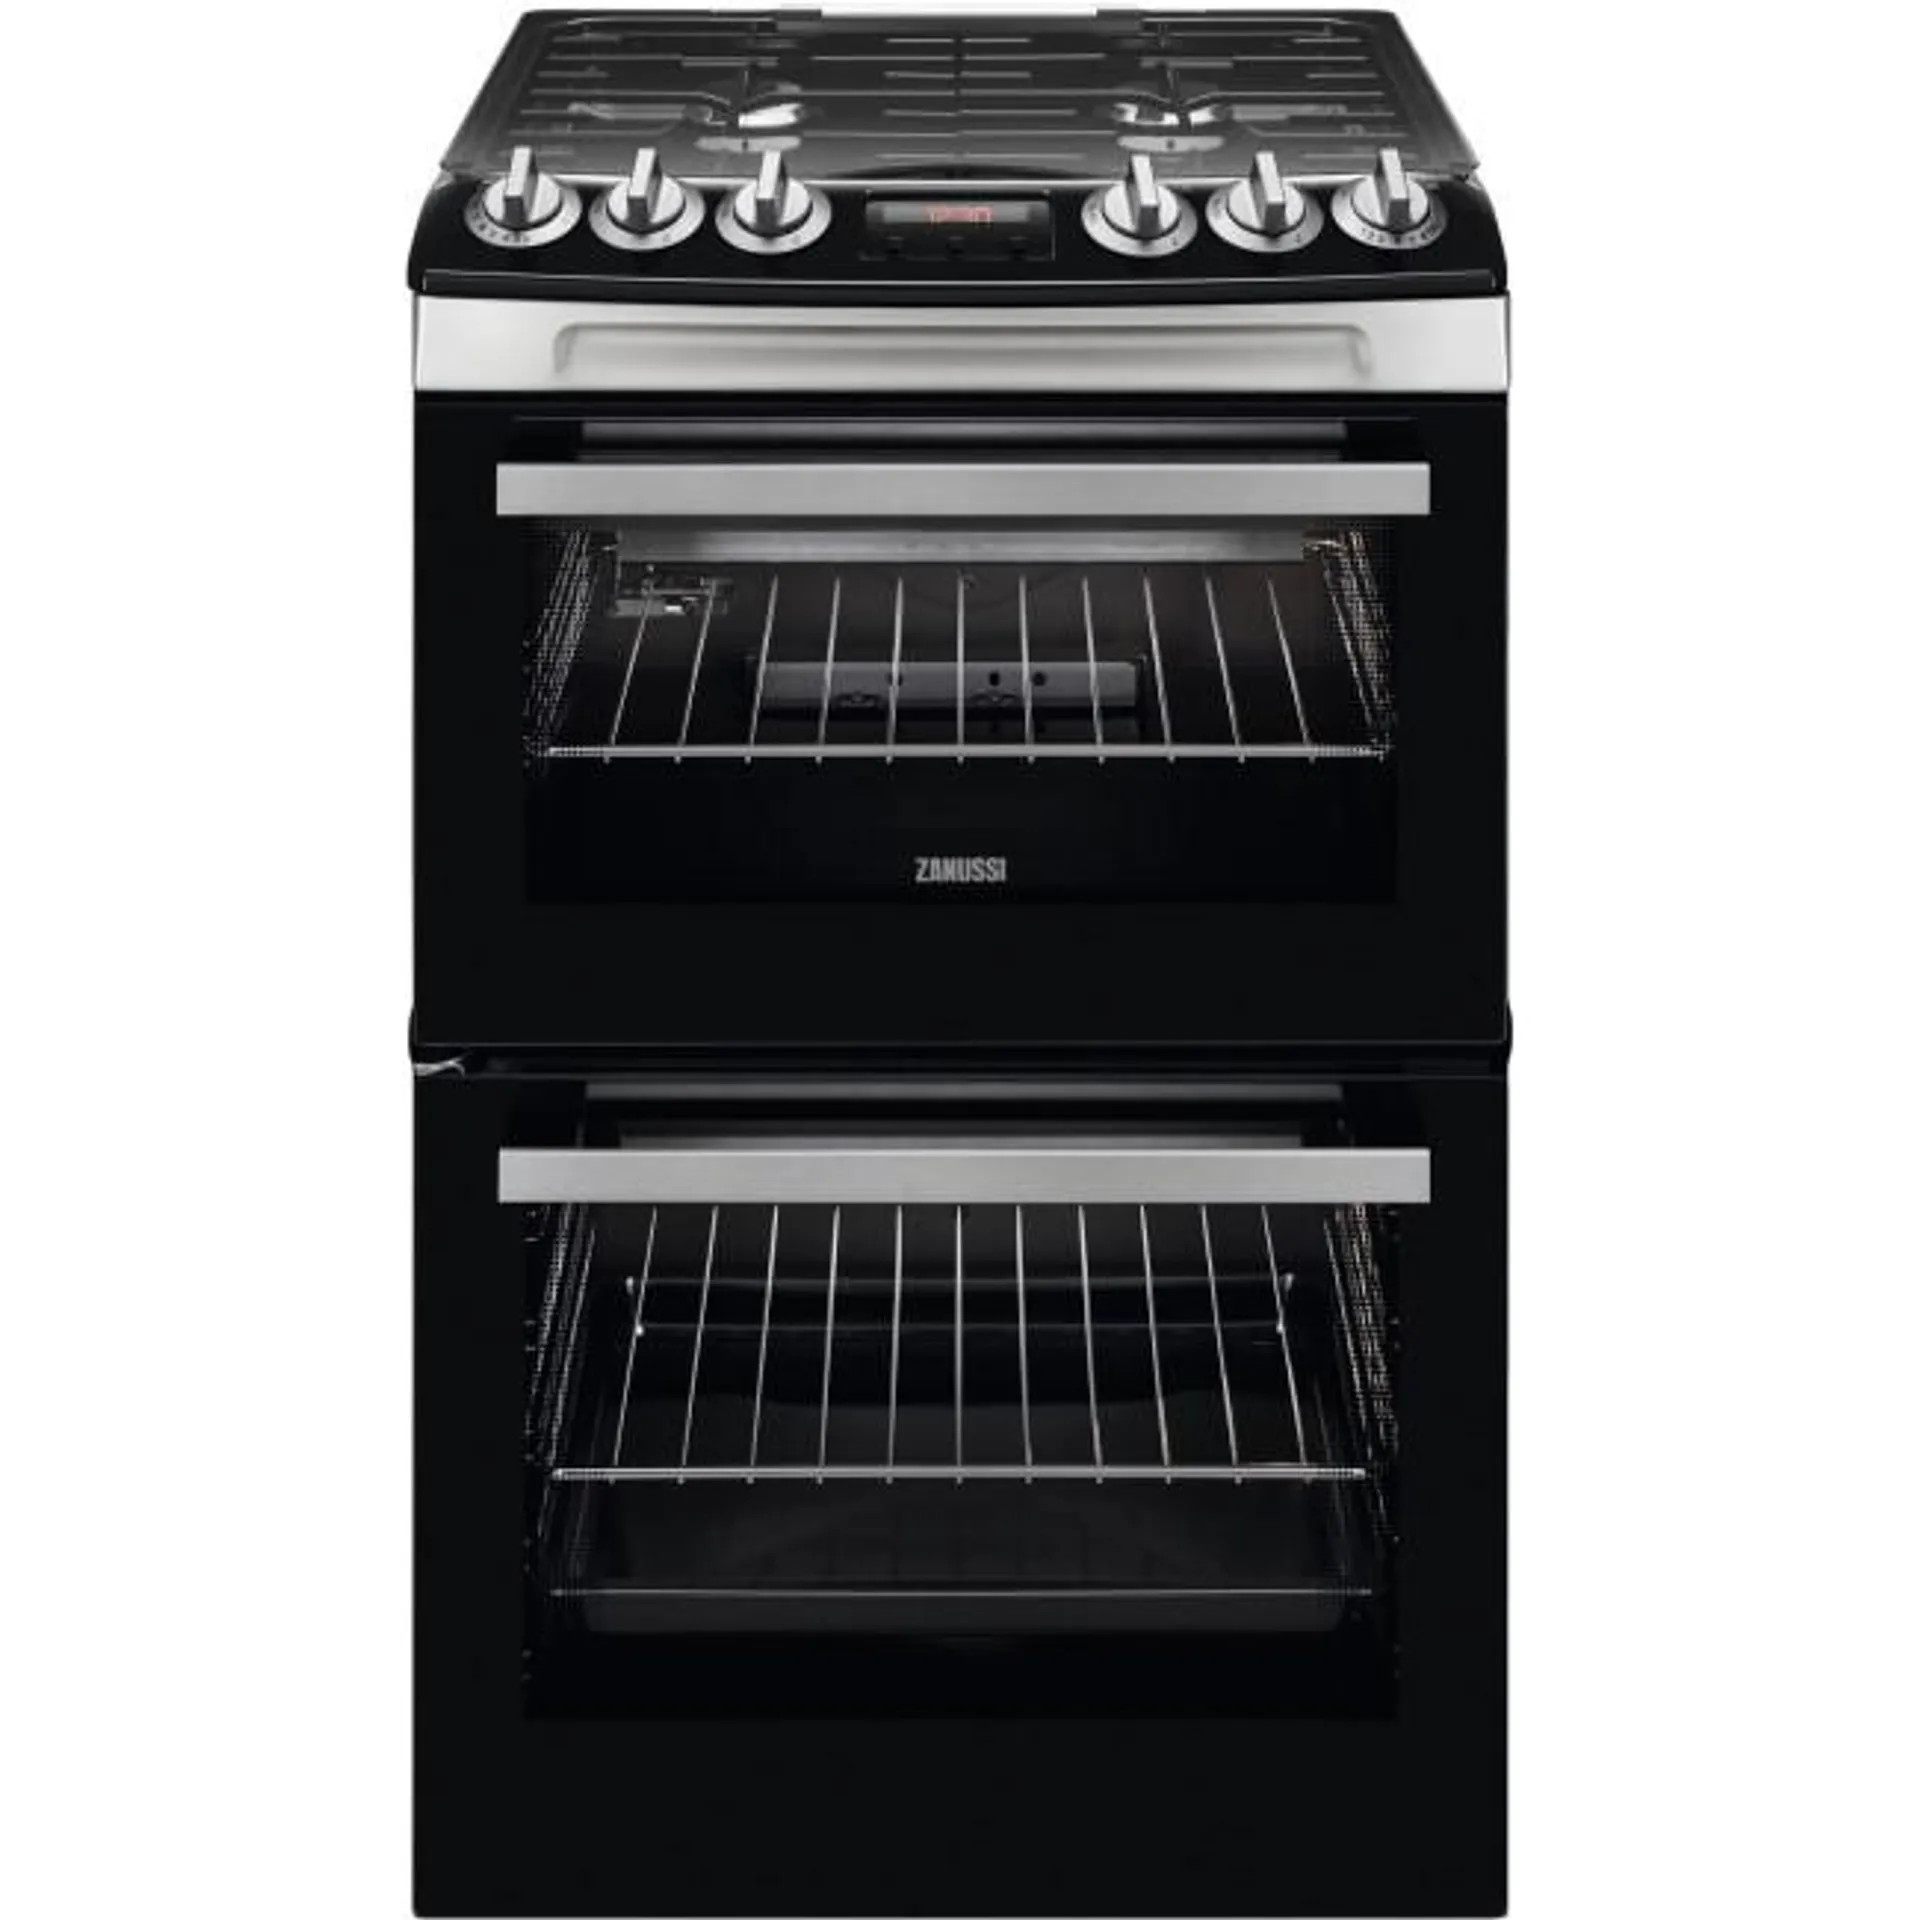 Zanussi 55cm Double Oven Gas Cooker with Catalytic Liners - Stainless Steel